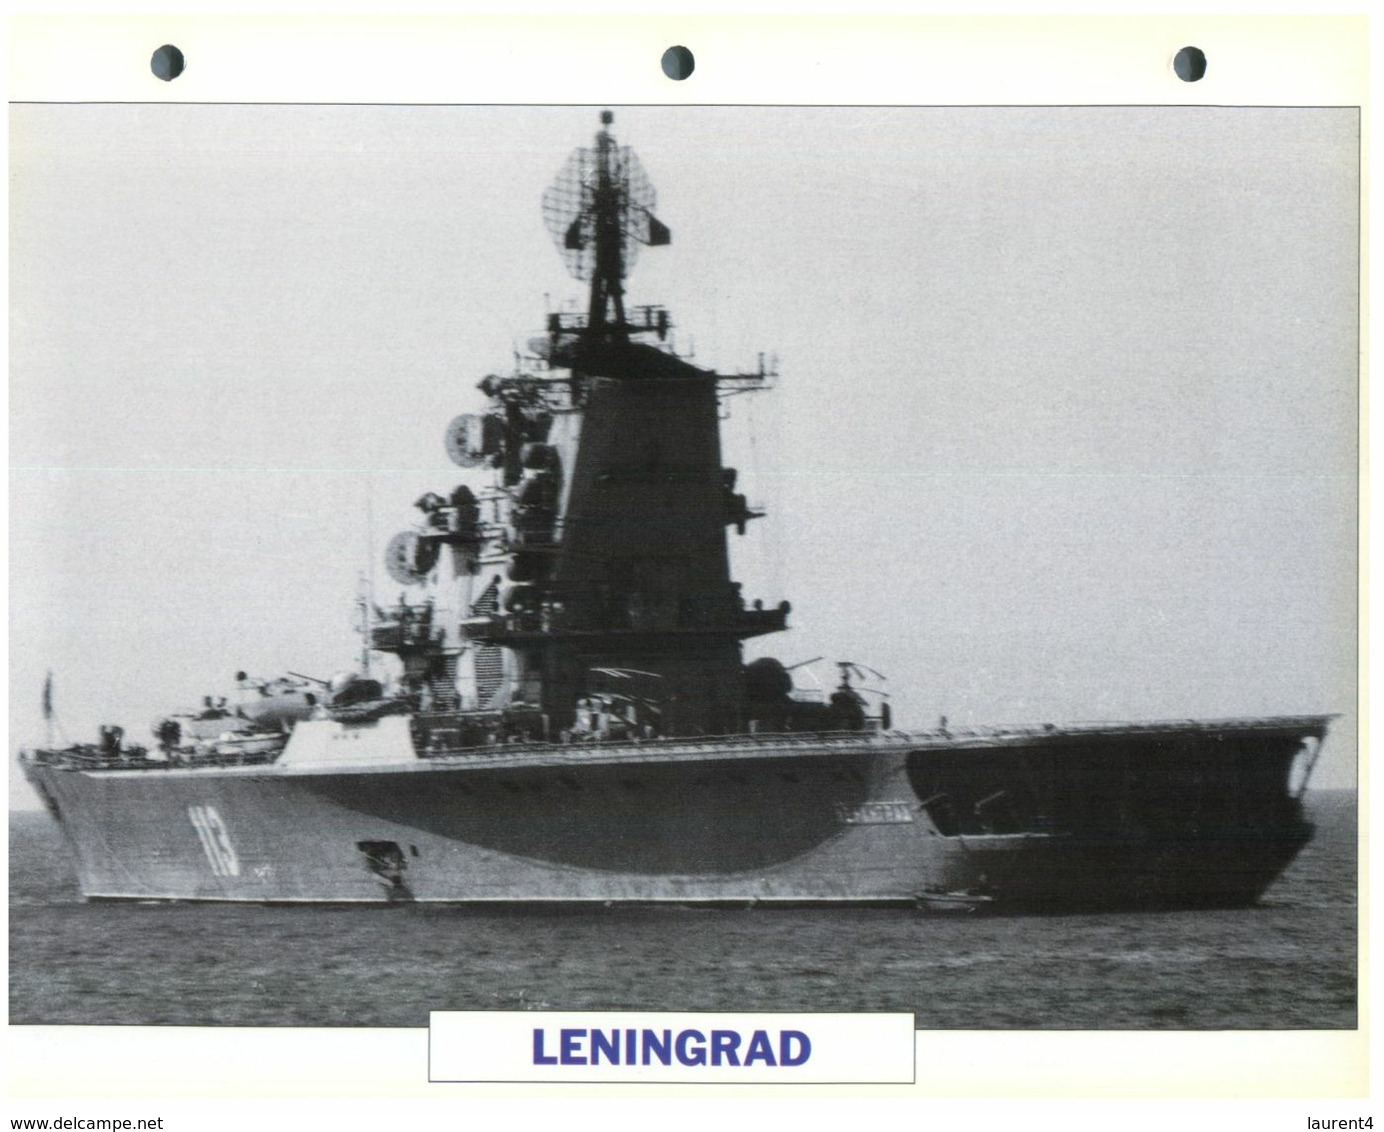 (25 X 19 Cm) (26-08-2020) - H - Photo And Info Sheet On Warship - Russia Navy - Leningrad (113) Helicopter Carrrier - Bateaux